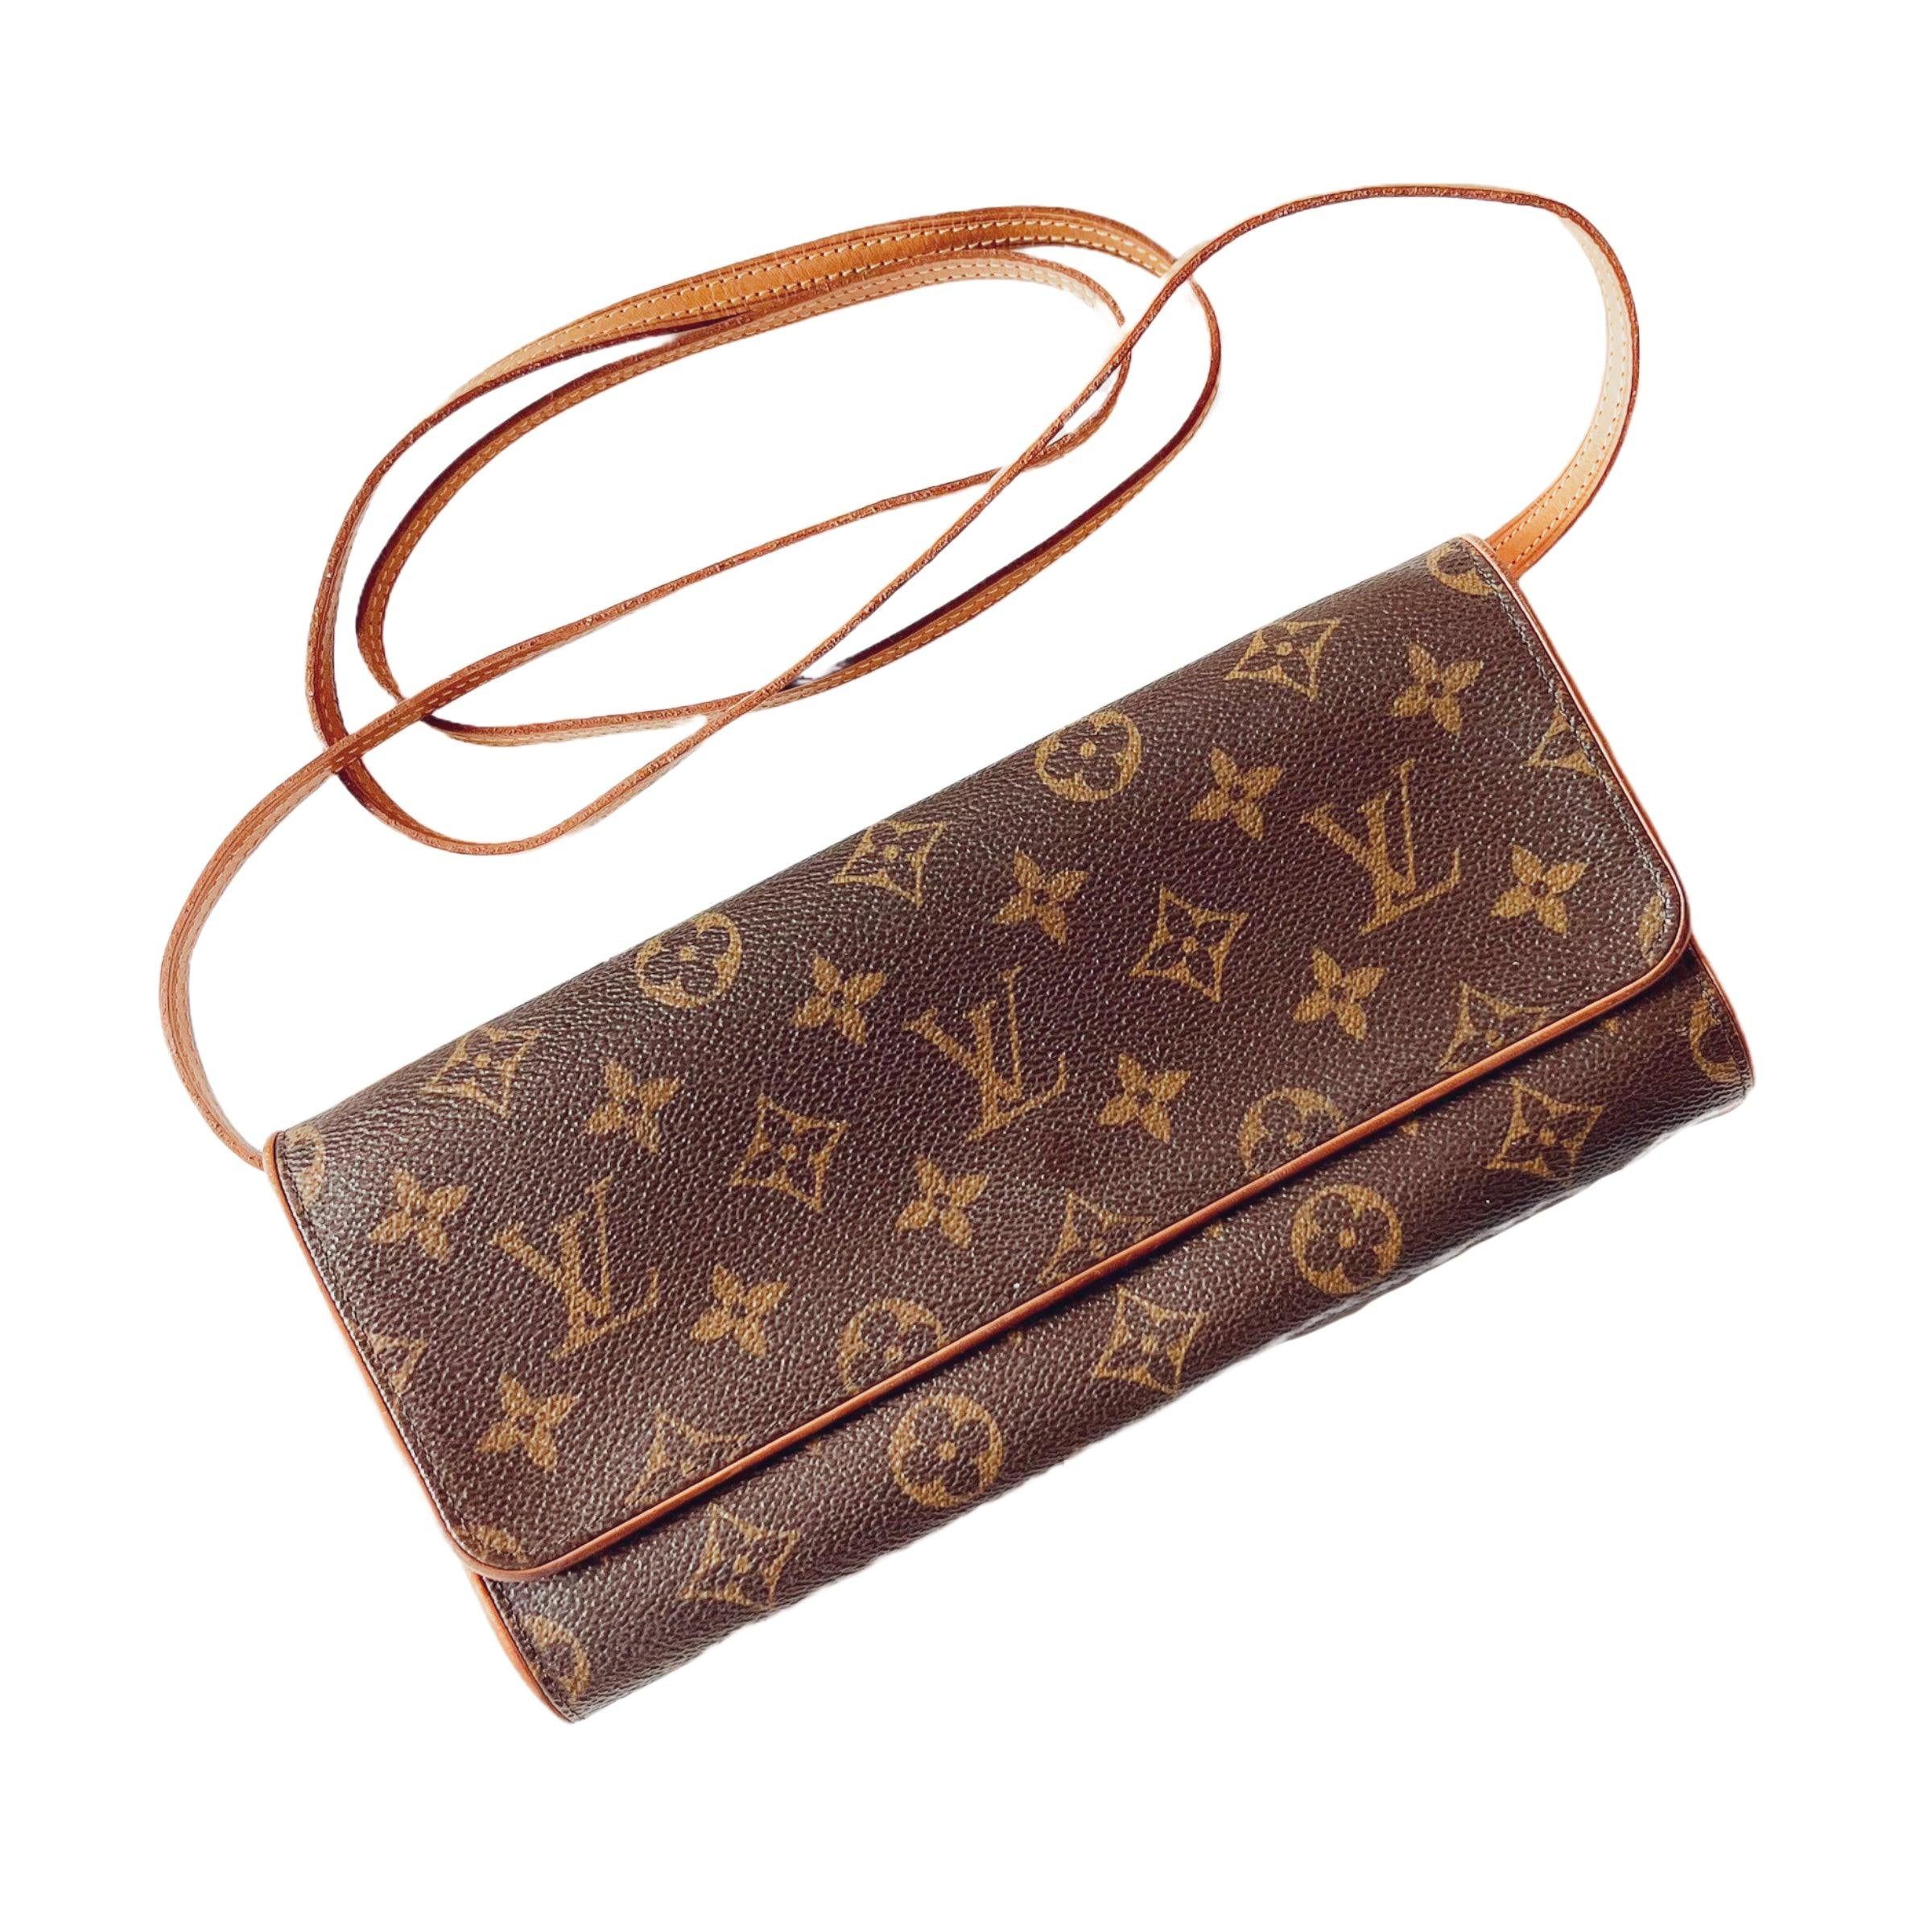 Shop for Louis Vuitton Monogram Canvas Leather Twin GM Clutch Shoulder Bag  - Shipped from USA